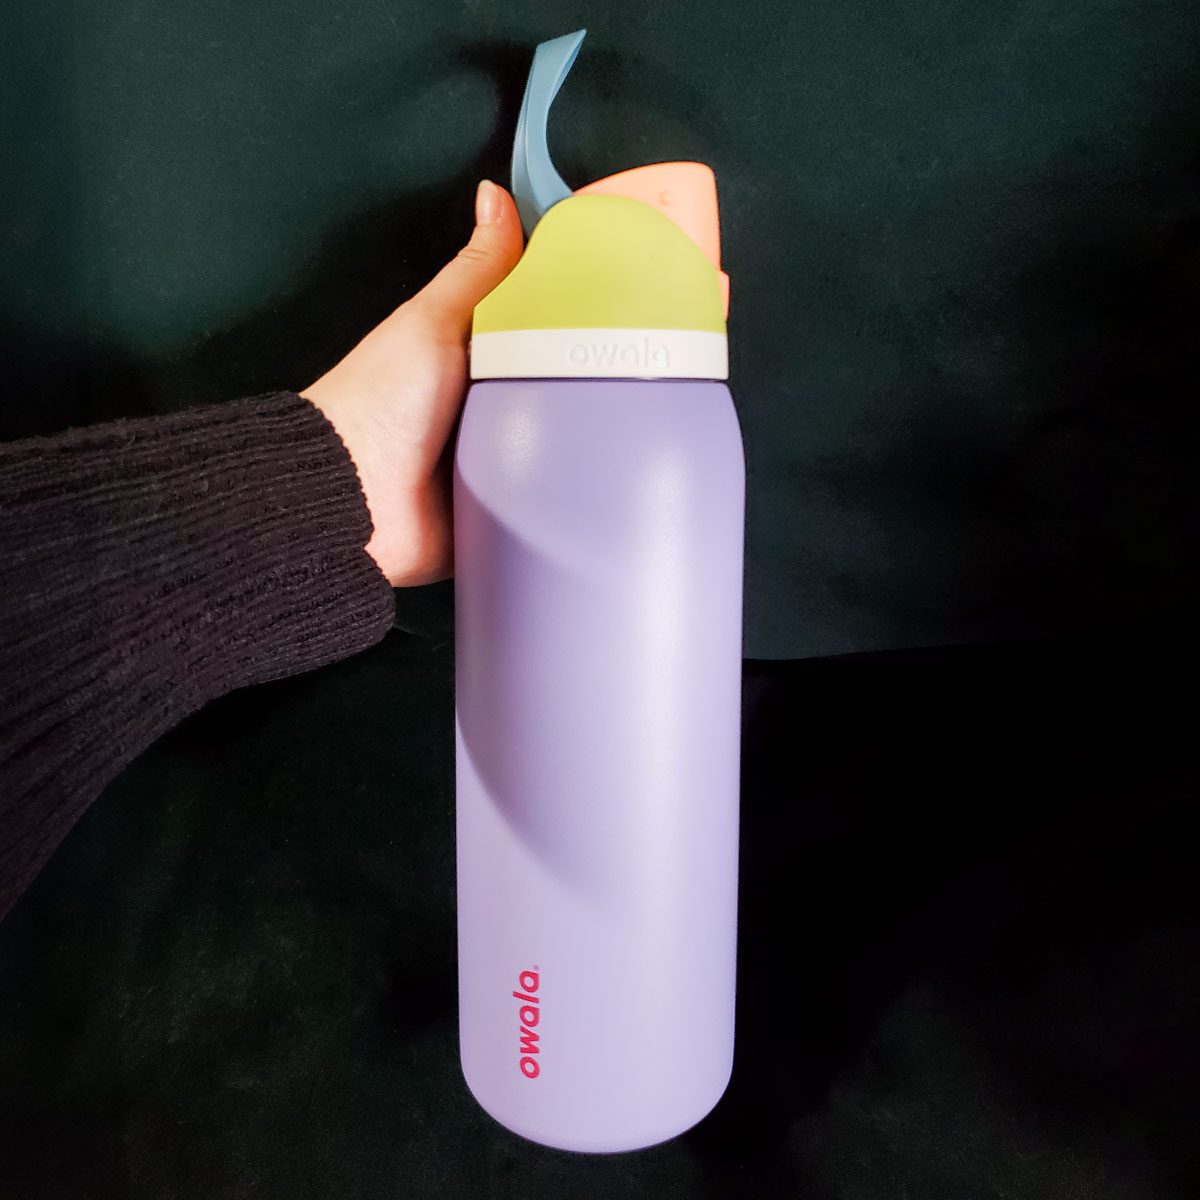 <h3>Owala FreeSip</h3> <p>The <a href="https://owalalife.com/products/freesip" rel="noopener">Owala Freesip</a> bottle is so pretty that I get comments on it constantly—but that's not the only reason I love it. From triple-layer stainless steel insulation that keeps the contents cool even in my gym's steam room to a leak-proof lid that doubles as a straw spout, you can't go wrong with one of these. A big, wide opening leaves plenty of space for ice. The lid even lifts as an impromptu handle. Super helpful while on a hiking trail!</p> <p>Definitely the best aspect of these bottles, however, is the cool, modern look. There are 15 different colorways to choose from. Mine is Retro Boardwalk, but I have my eyes on Neo Sage and Night Safari. Just one thing—be prepared to receive daily compliments!</p> <p><strong>Size(s): </strong>19 oz., 24 oz., 25 oz., 32 oz., 40 oz. <strong>| Lid(s): </strong>Freesip Spout<strong> | Dishwasher Safe: </strong>Lid, Yes; Body, No<strong> | Material:  </strong>Stainless Steel<strong> | Hot Liquids: </strong>No</p> <p><strong>Pros</strong></p> <ul> <li>Straw and sip-ready spout</li> <li>15 dazzling color options</li> <li>Wide opening for ice</li> <li>Leakproof lid lock doubles as a handle</li> <li>Five different sizes available</li> </ul> <p><strong>Cons</strong></p> <ul> <li>Heavy</li> <li>Pricey</li> </ul> <p class="listicle-page__cta-button-shop"><a class="shop-btn" href="https://owalalife.com/products/freesip">Shop on Owala</a></p> <p class="listicle-page__cta-button-shop"><a class="shop-btn" href="https://www.amazon.com/Owala-Insulated-Stainless-Steel-Push-Button-Marshmallow/dp/B085DVNHHK">Shop on Amazon</a></p> <p class="listicle-page__cta-button-shop"><a class="shop-btn" href="https://goto.target.com/3eN9NM">Shop on Target</a></p>